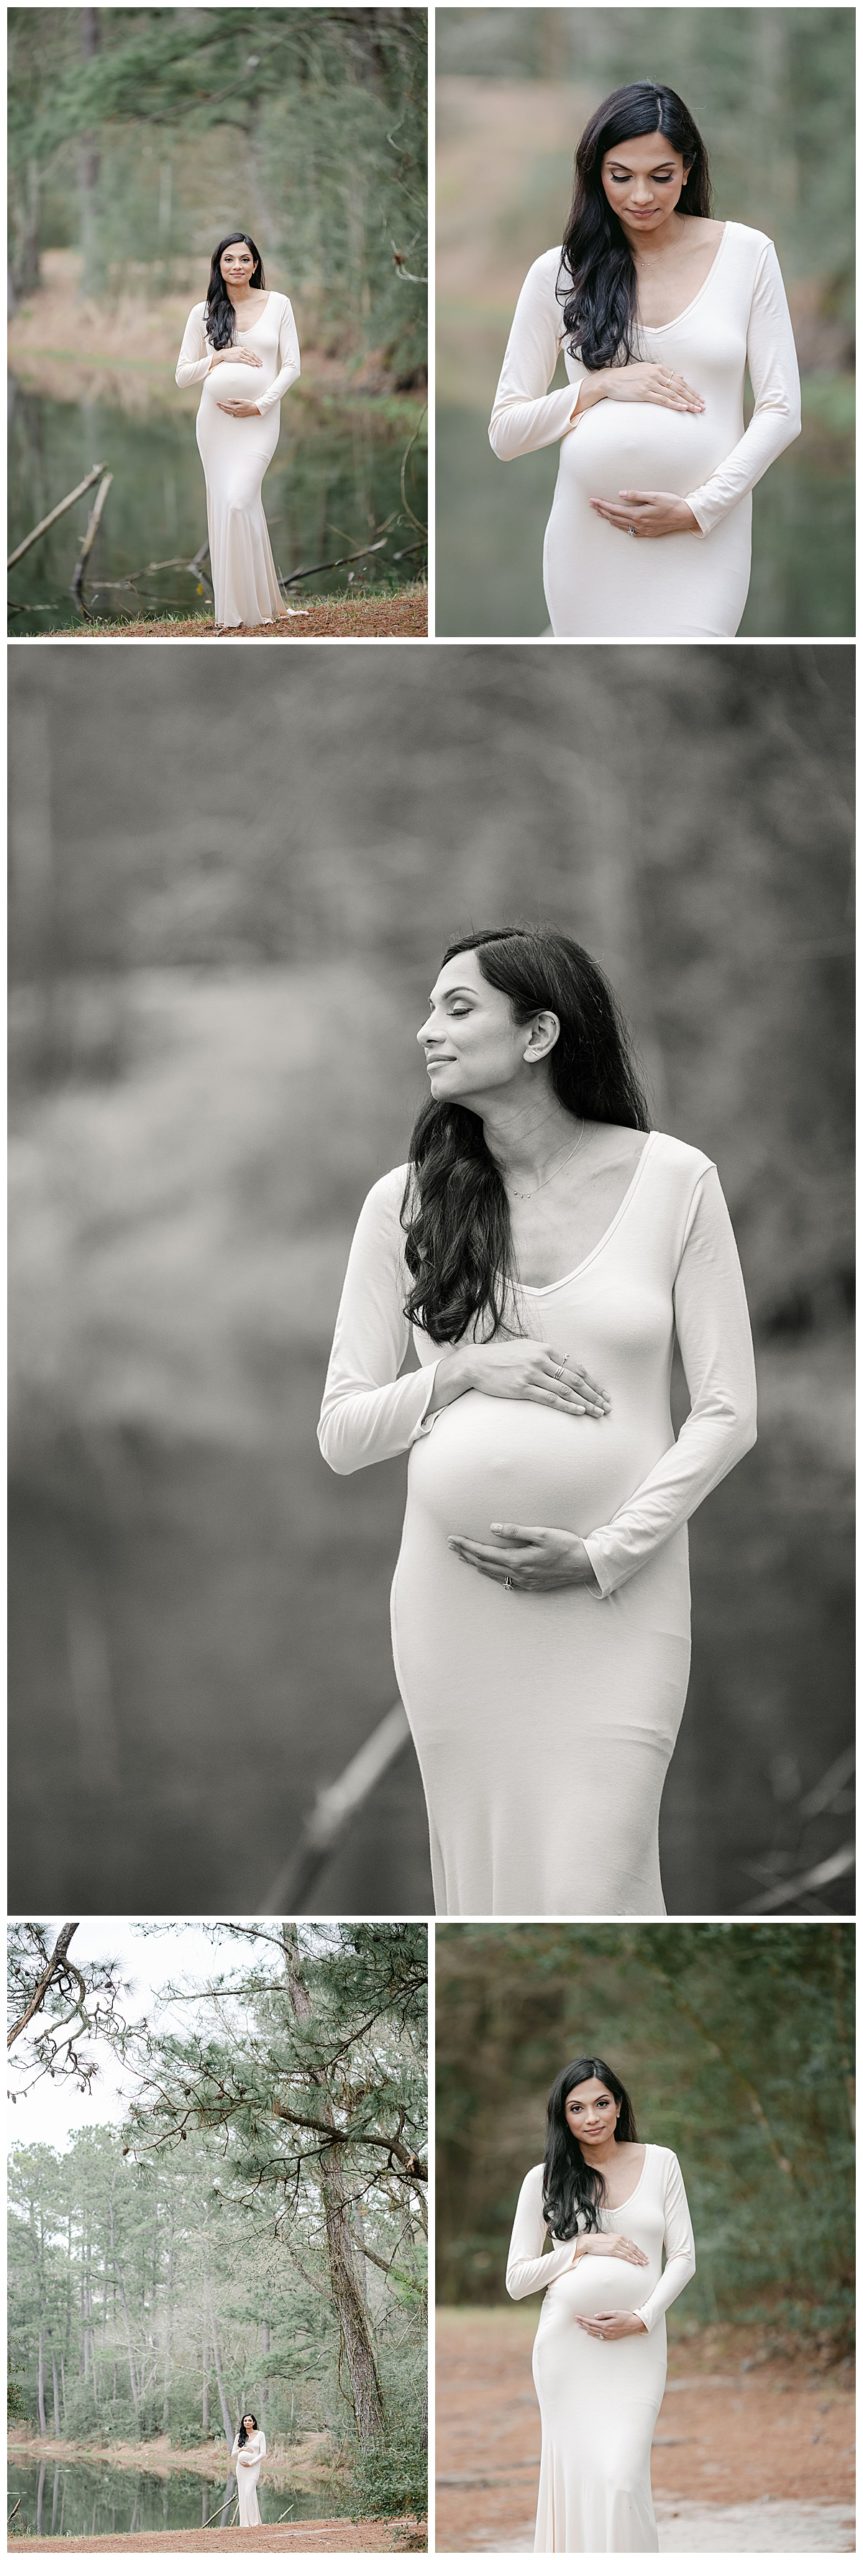 Maternity session at Spring Texas park